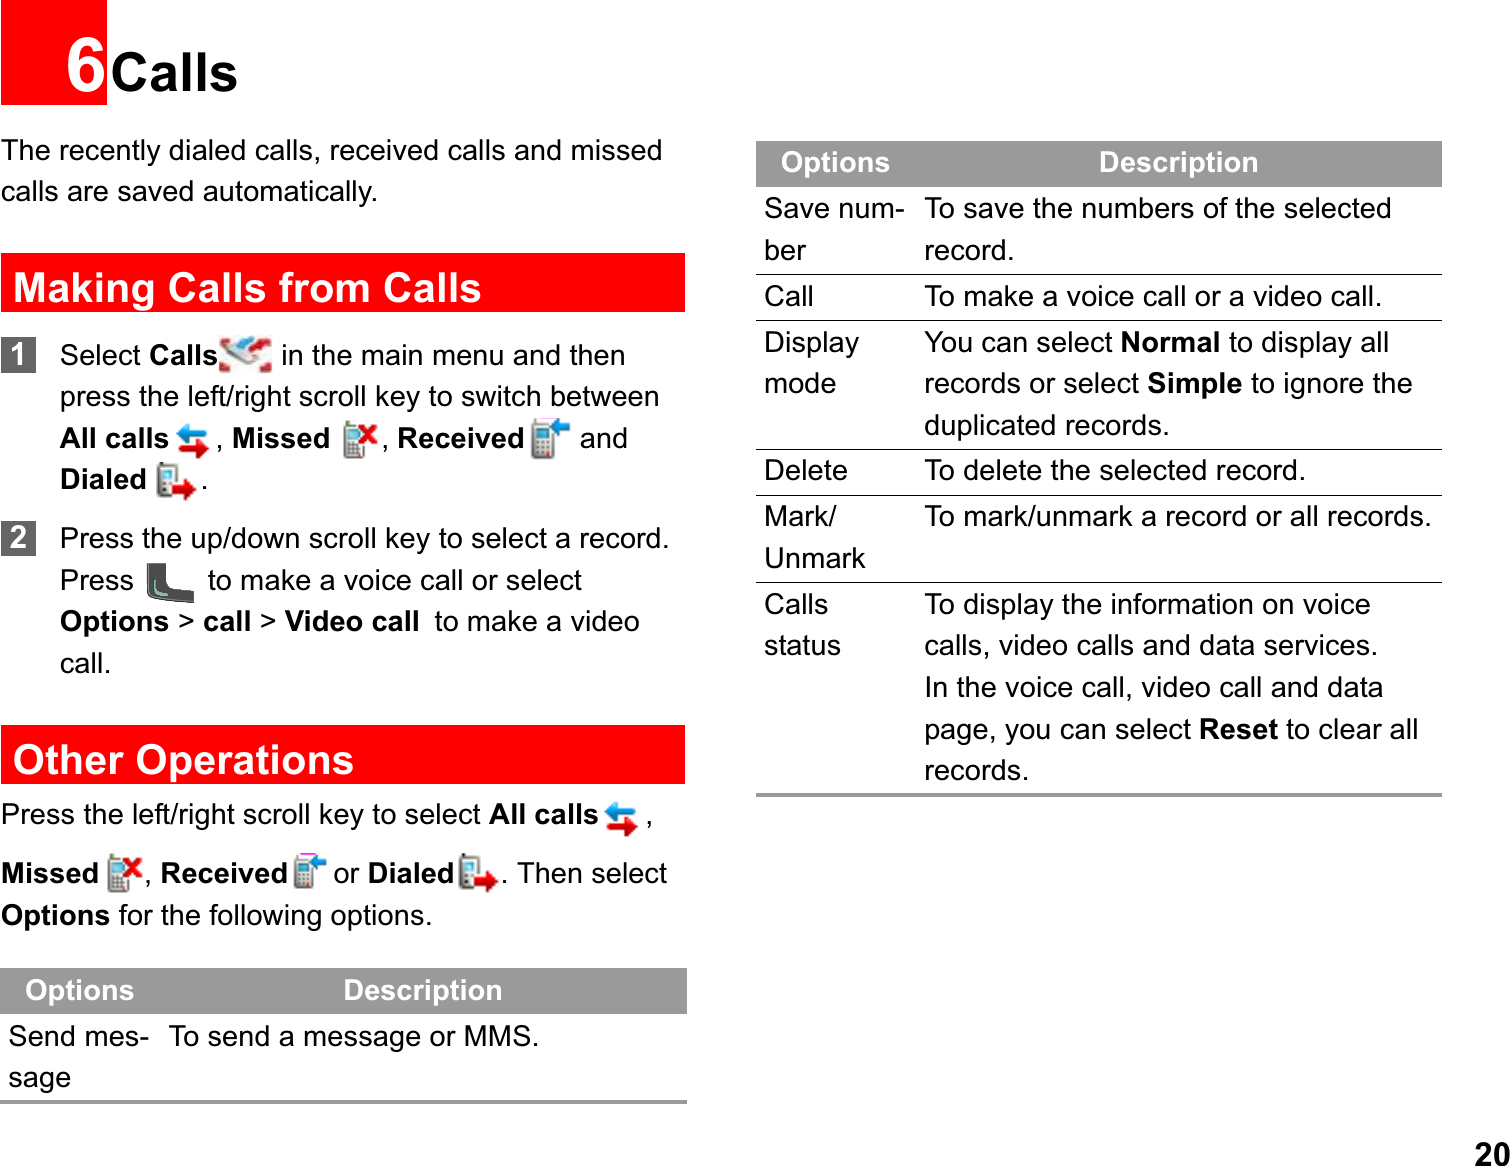 206CallsThe recently dialed calls, received calls and missed calls are saved automatically. Making Calls from Calls1Select Calls  in the main menu and then press the left/right scroll key to switch between All calls ,Missed ,Received and Dialed  .2Press the up/down scroll key to select a record. Press   to make a voice call or select Options &gt; call &gt; Video callto make a video call.Other OperationsPress the left/right scroll key to select All calls ,Missed ,Received or Dialed . Then select Options for the following options.Options DescriptionSend mes-sageTo send a message or MMS.Save num-berTo save the numbers of the selected record.Call To make a voice call or a video call. Display modeYou can select Normal to display all records or select Simple to ignore the duplicated records.Delete To delete the selected record.Mark/UnmarkTo mark/unmark a record or all records.CallsstatusTo display the information on voice calls, video calls and data services.In the voice call, video call and data page, you can select Reset to clear all records.Options Description